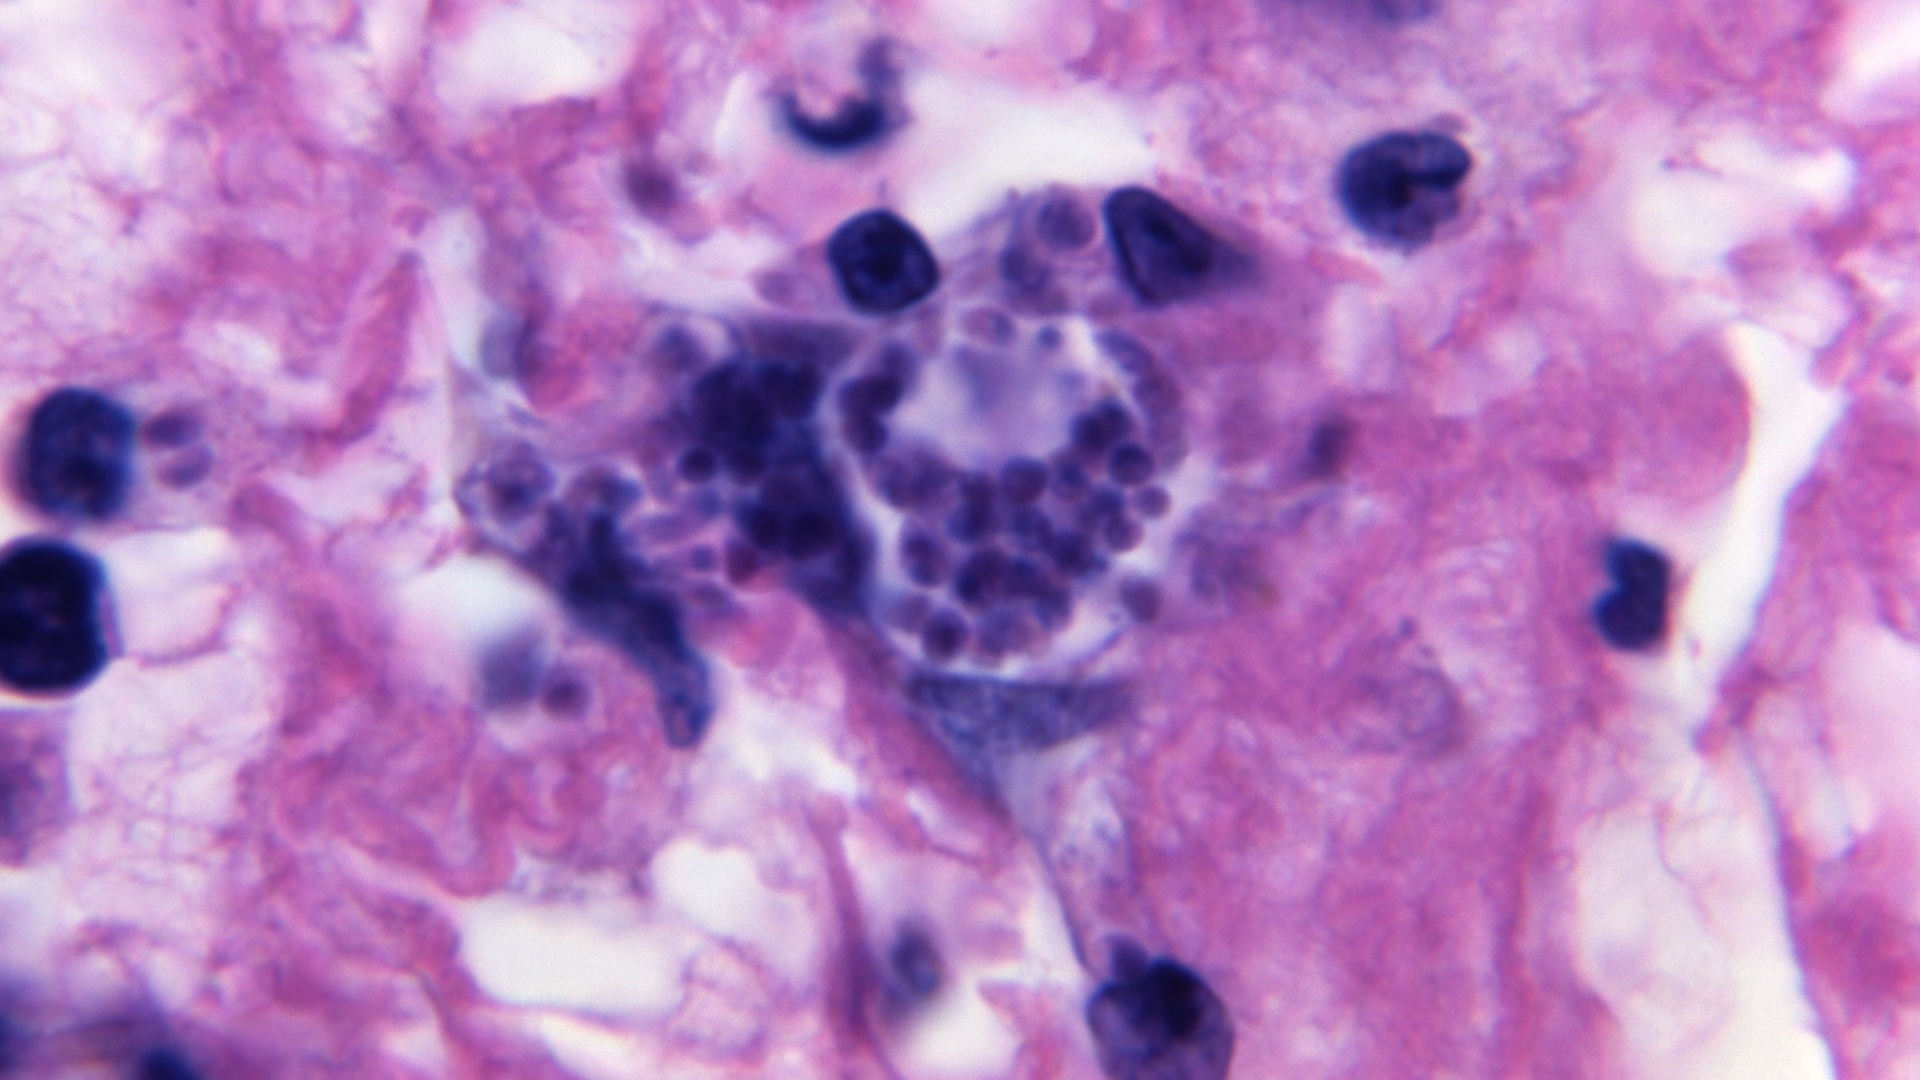 Photomicrograph of a tissue sample, revealed a close view of a darkly stained, Toxoplasma gondii tissue cyst filled with dark purple circles